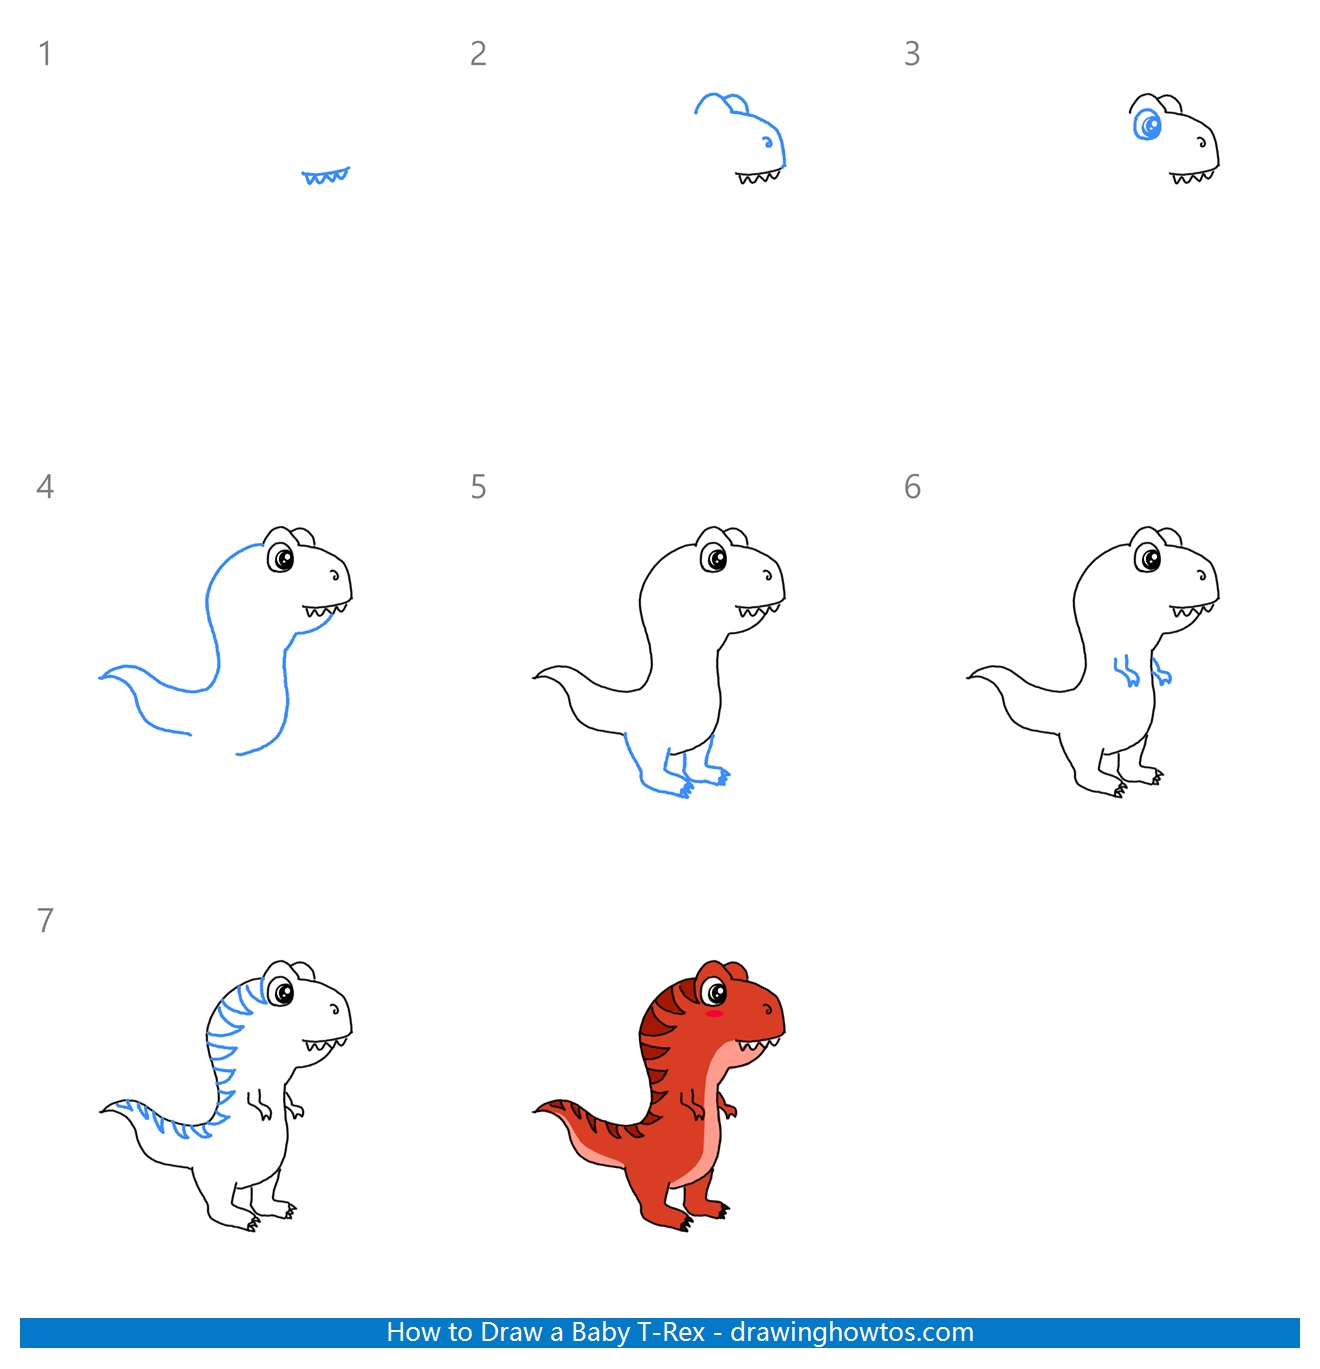 How to Draw a Baby T-Rex Step by Step